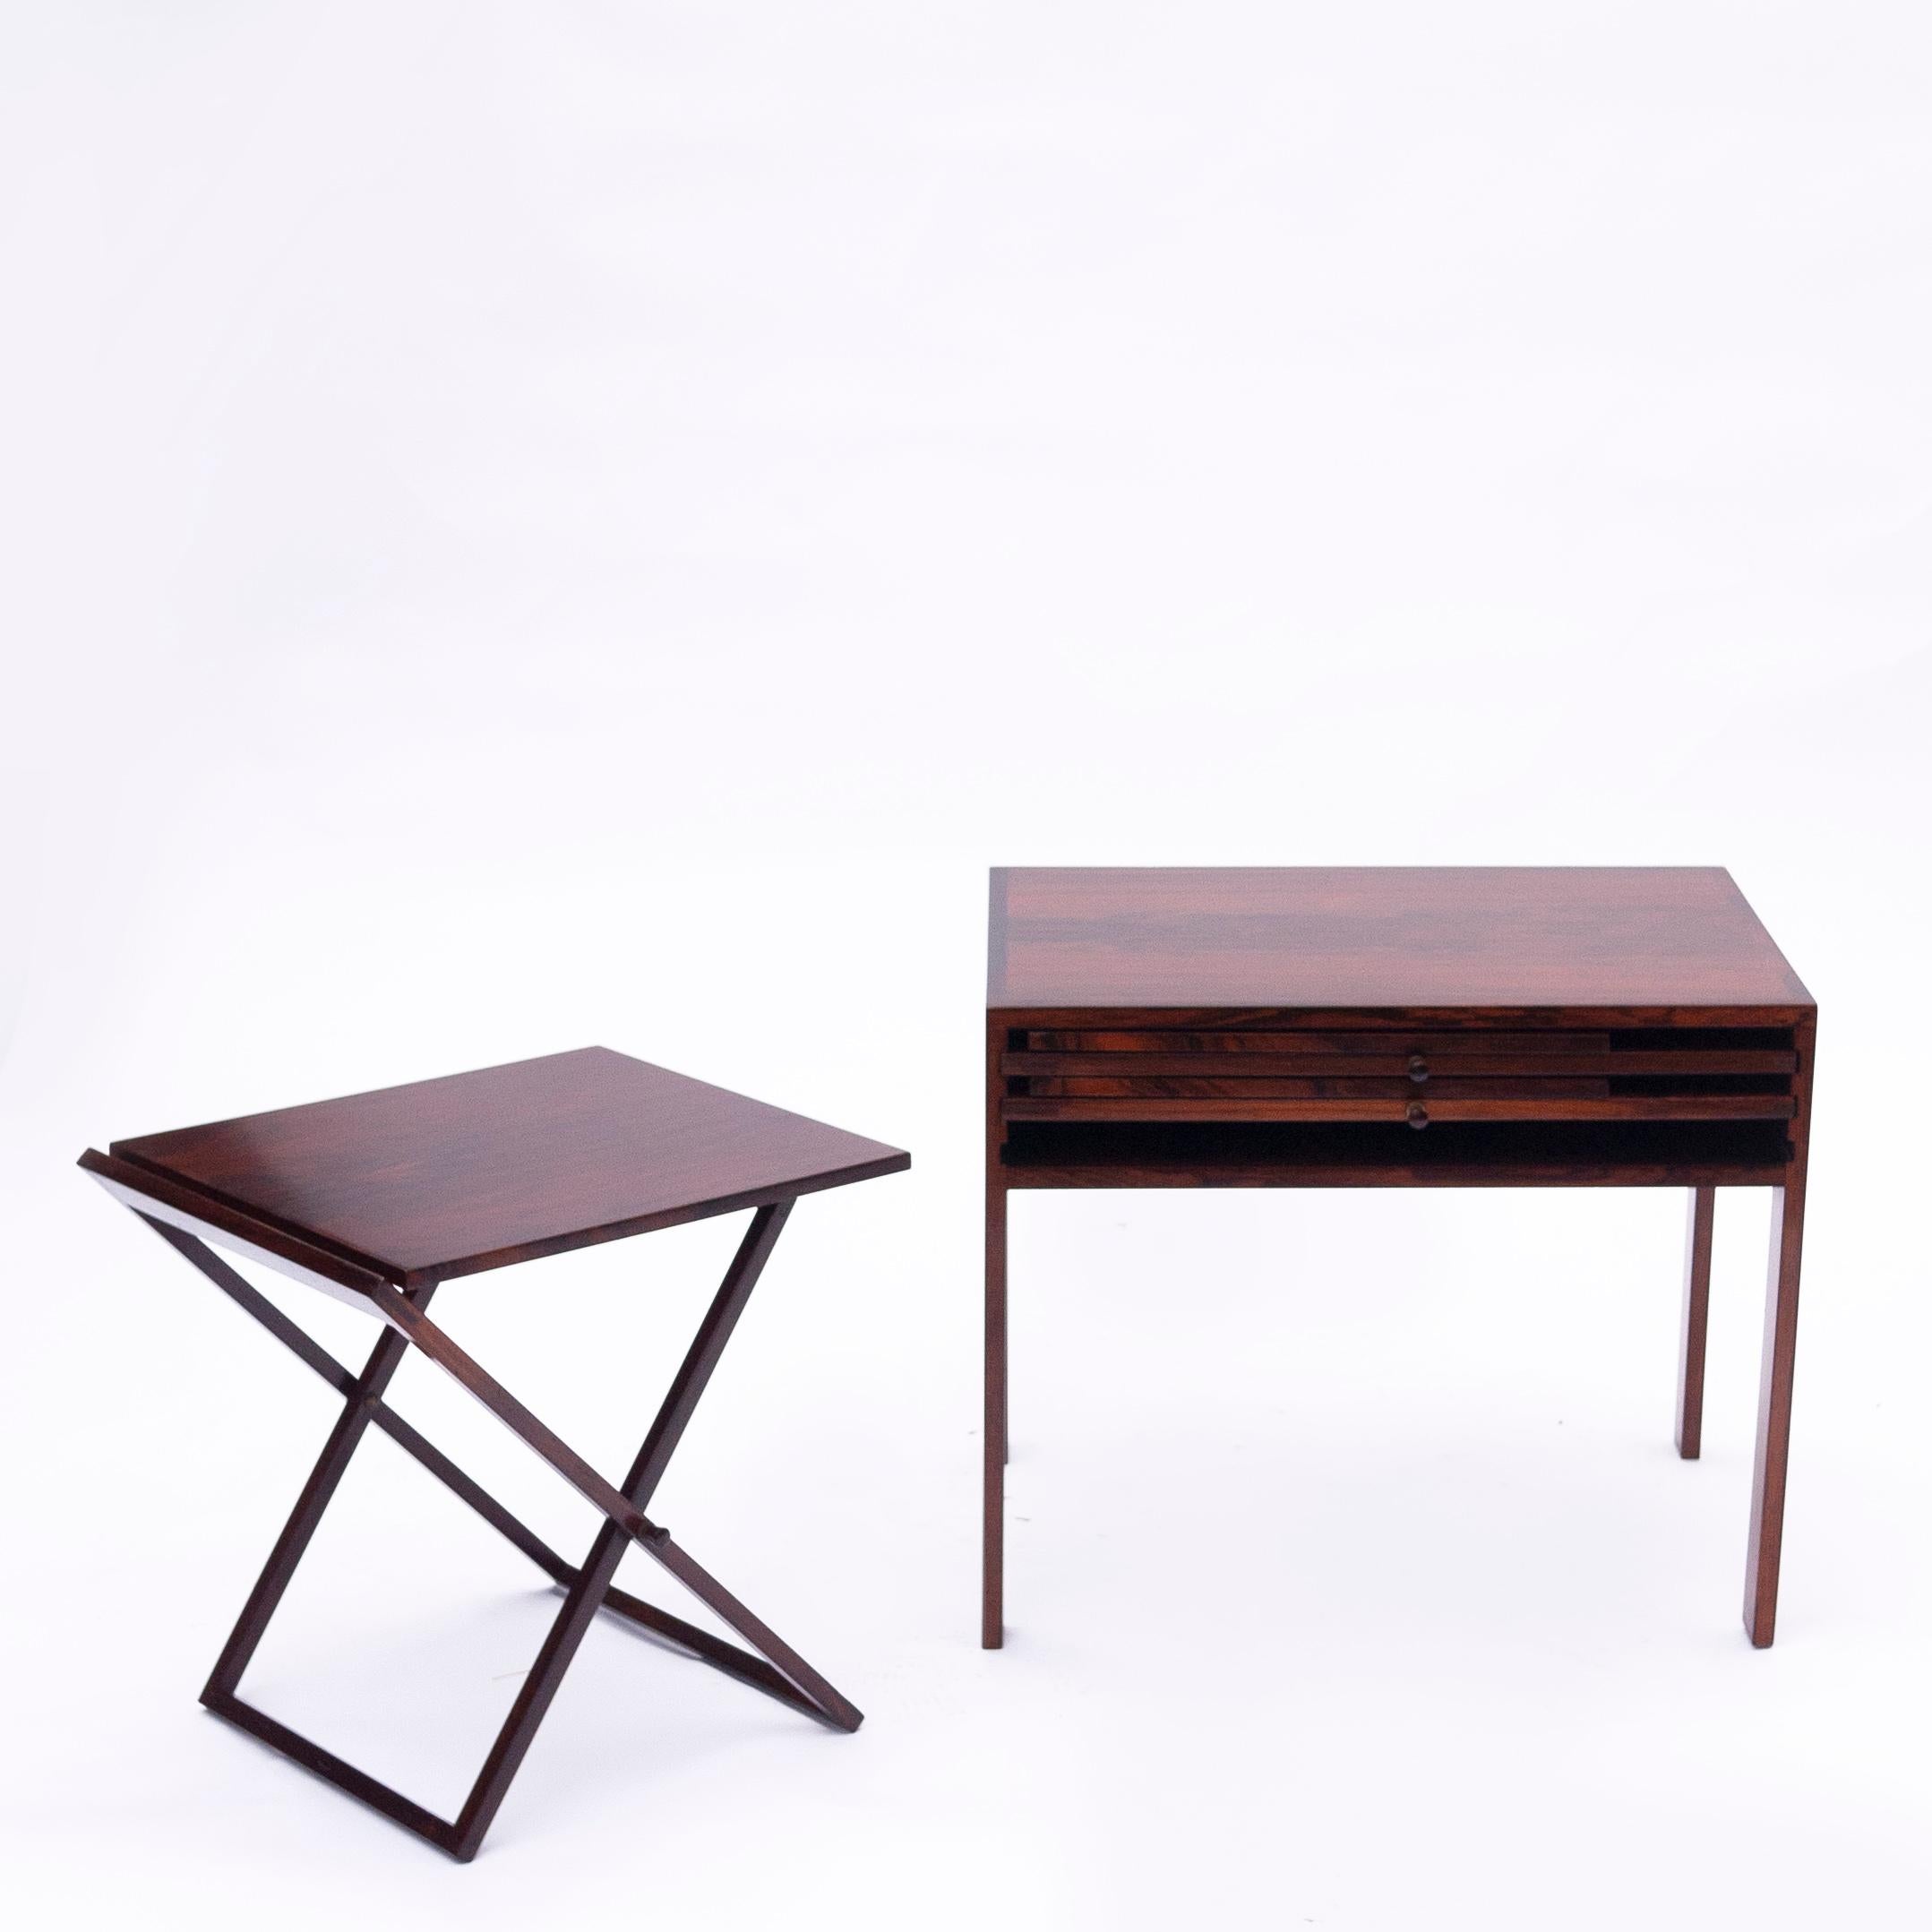 Scandinavian Nesting Tables and Side Table in Rosewood by Illum Wikkelsø, 1960s For Sale 7